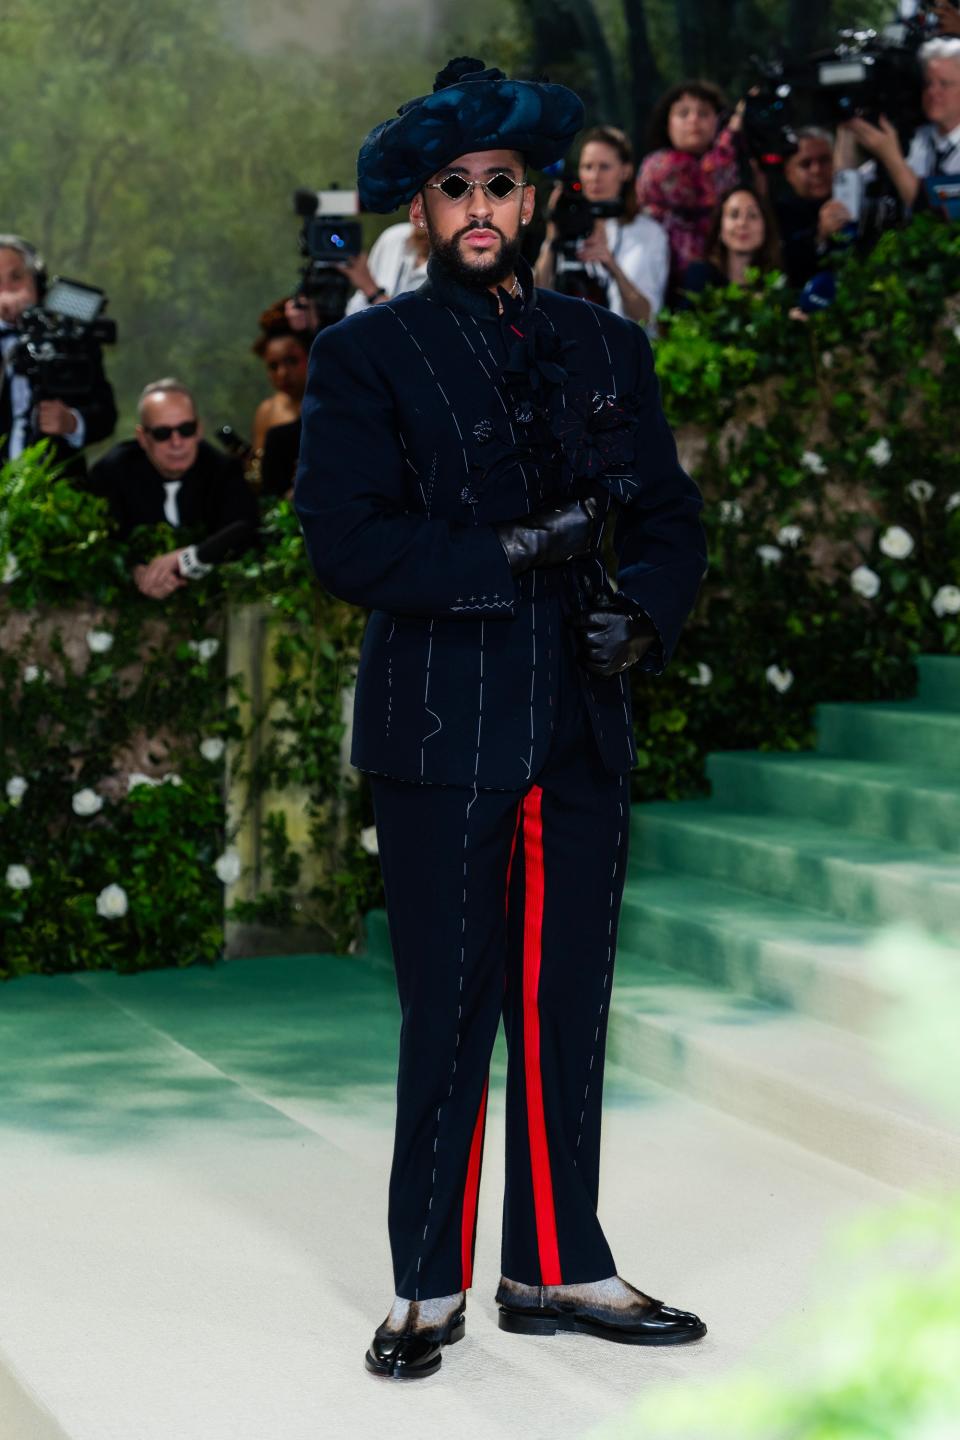 Zendaya's fellow co-chair also wore Maison Margiela, nodding to Count Axel from the short story that inspired the dress code with his suit and hat. The sunglasses and oxford shoes were the perfect accessories.